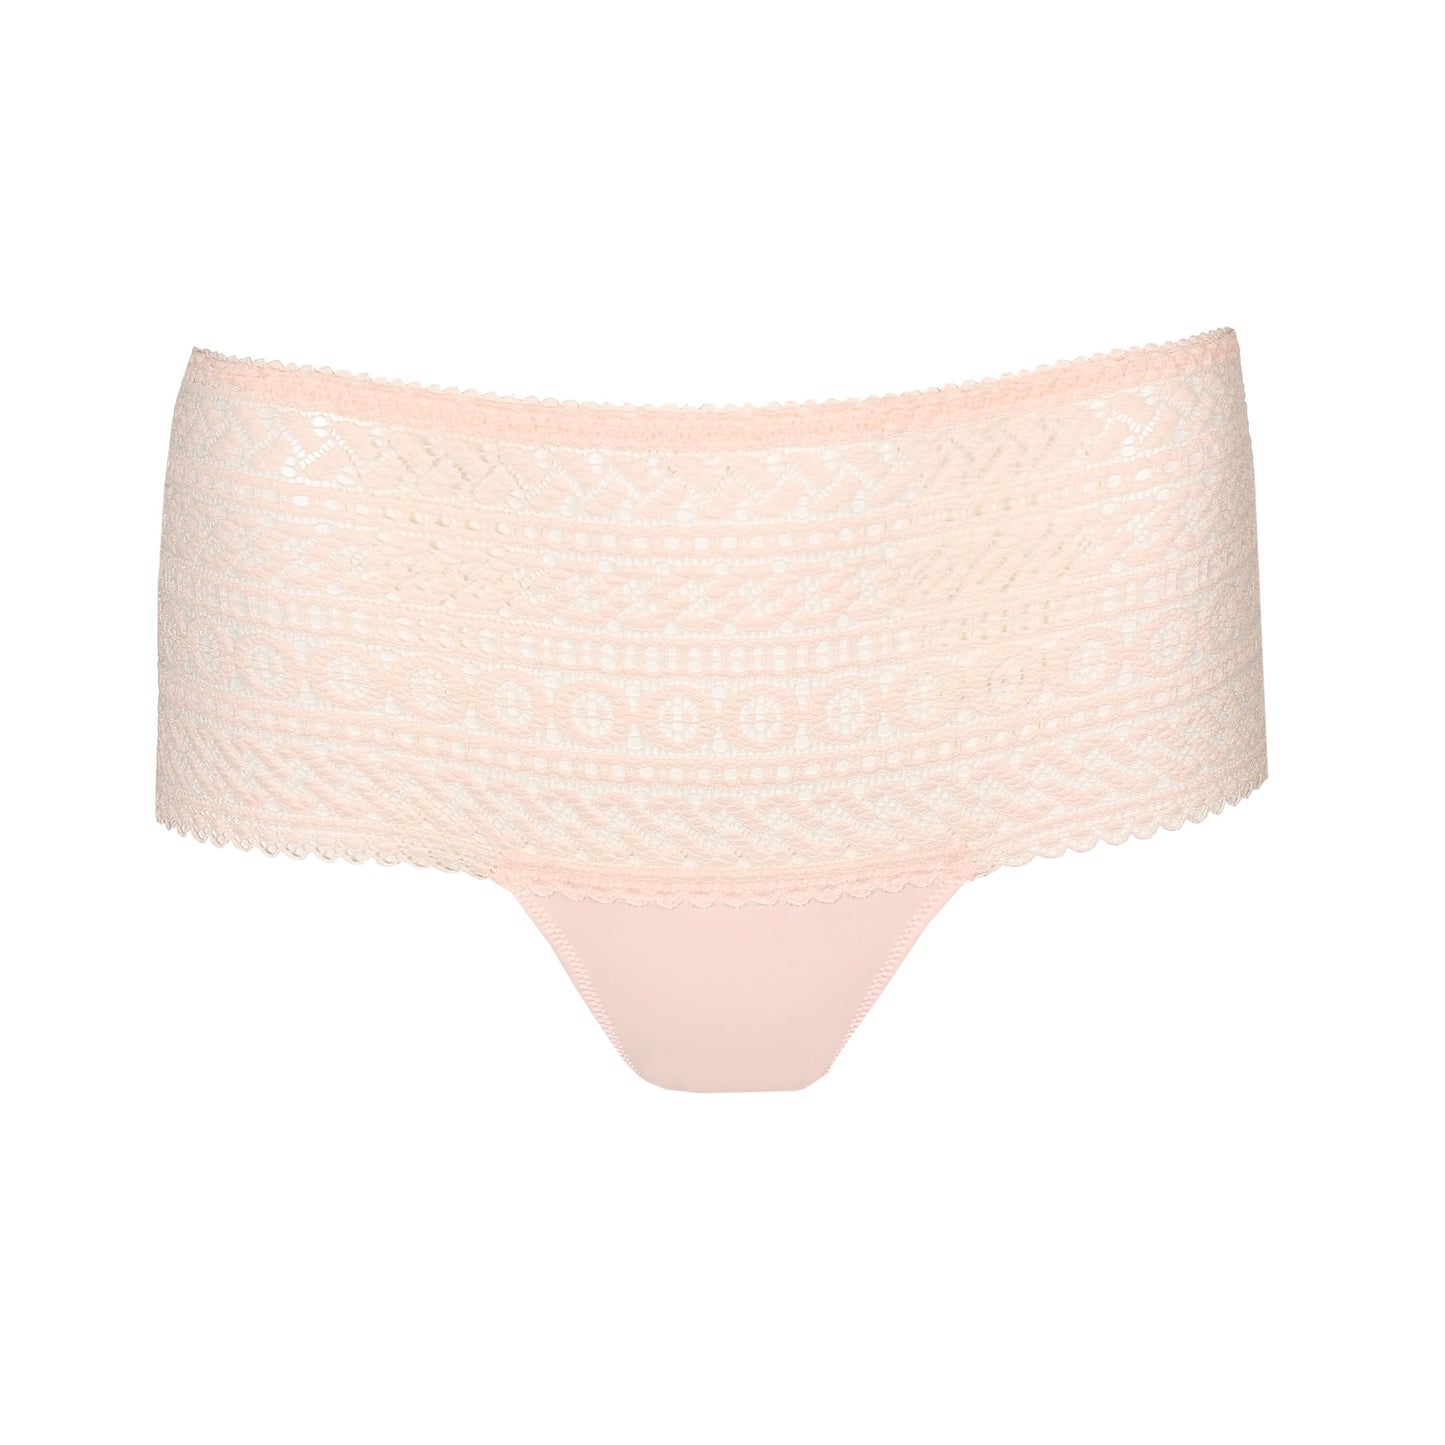 Front view of the Montara Luxury Thong with all over lace design in Crystal Pink by PrimaDonna.